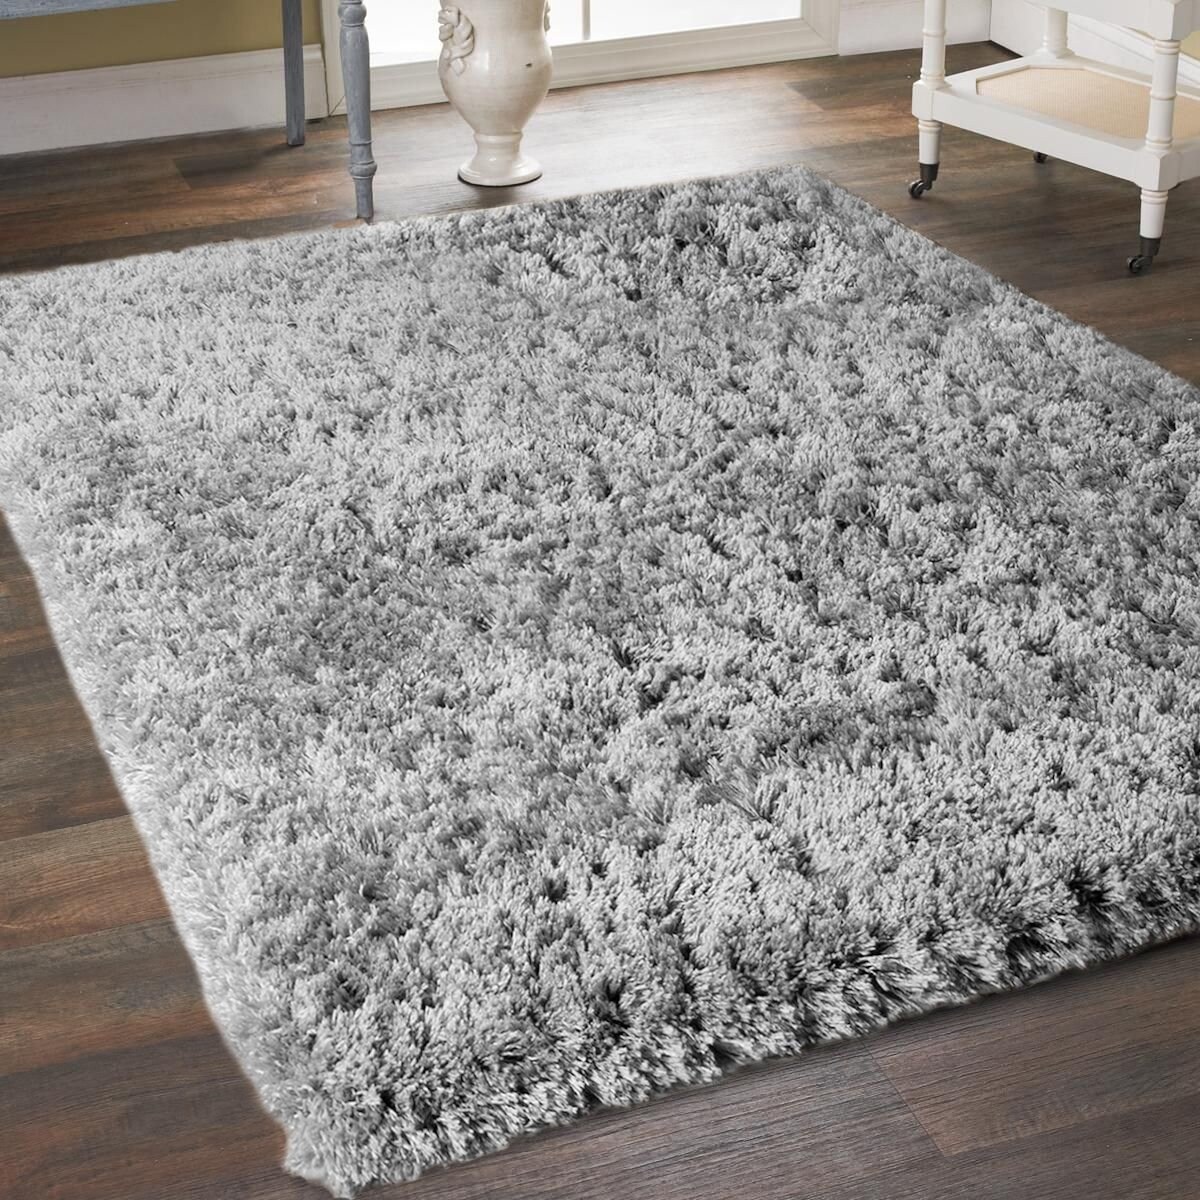 Round Runners Small Large Modern Quality 5cm Thick Silver Grey Shaggy Rugs